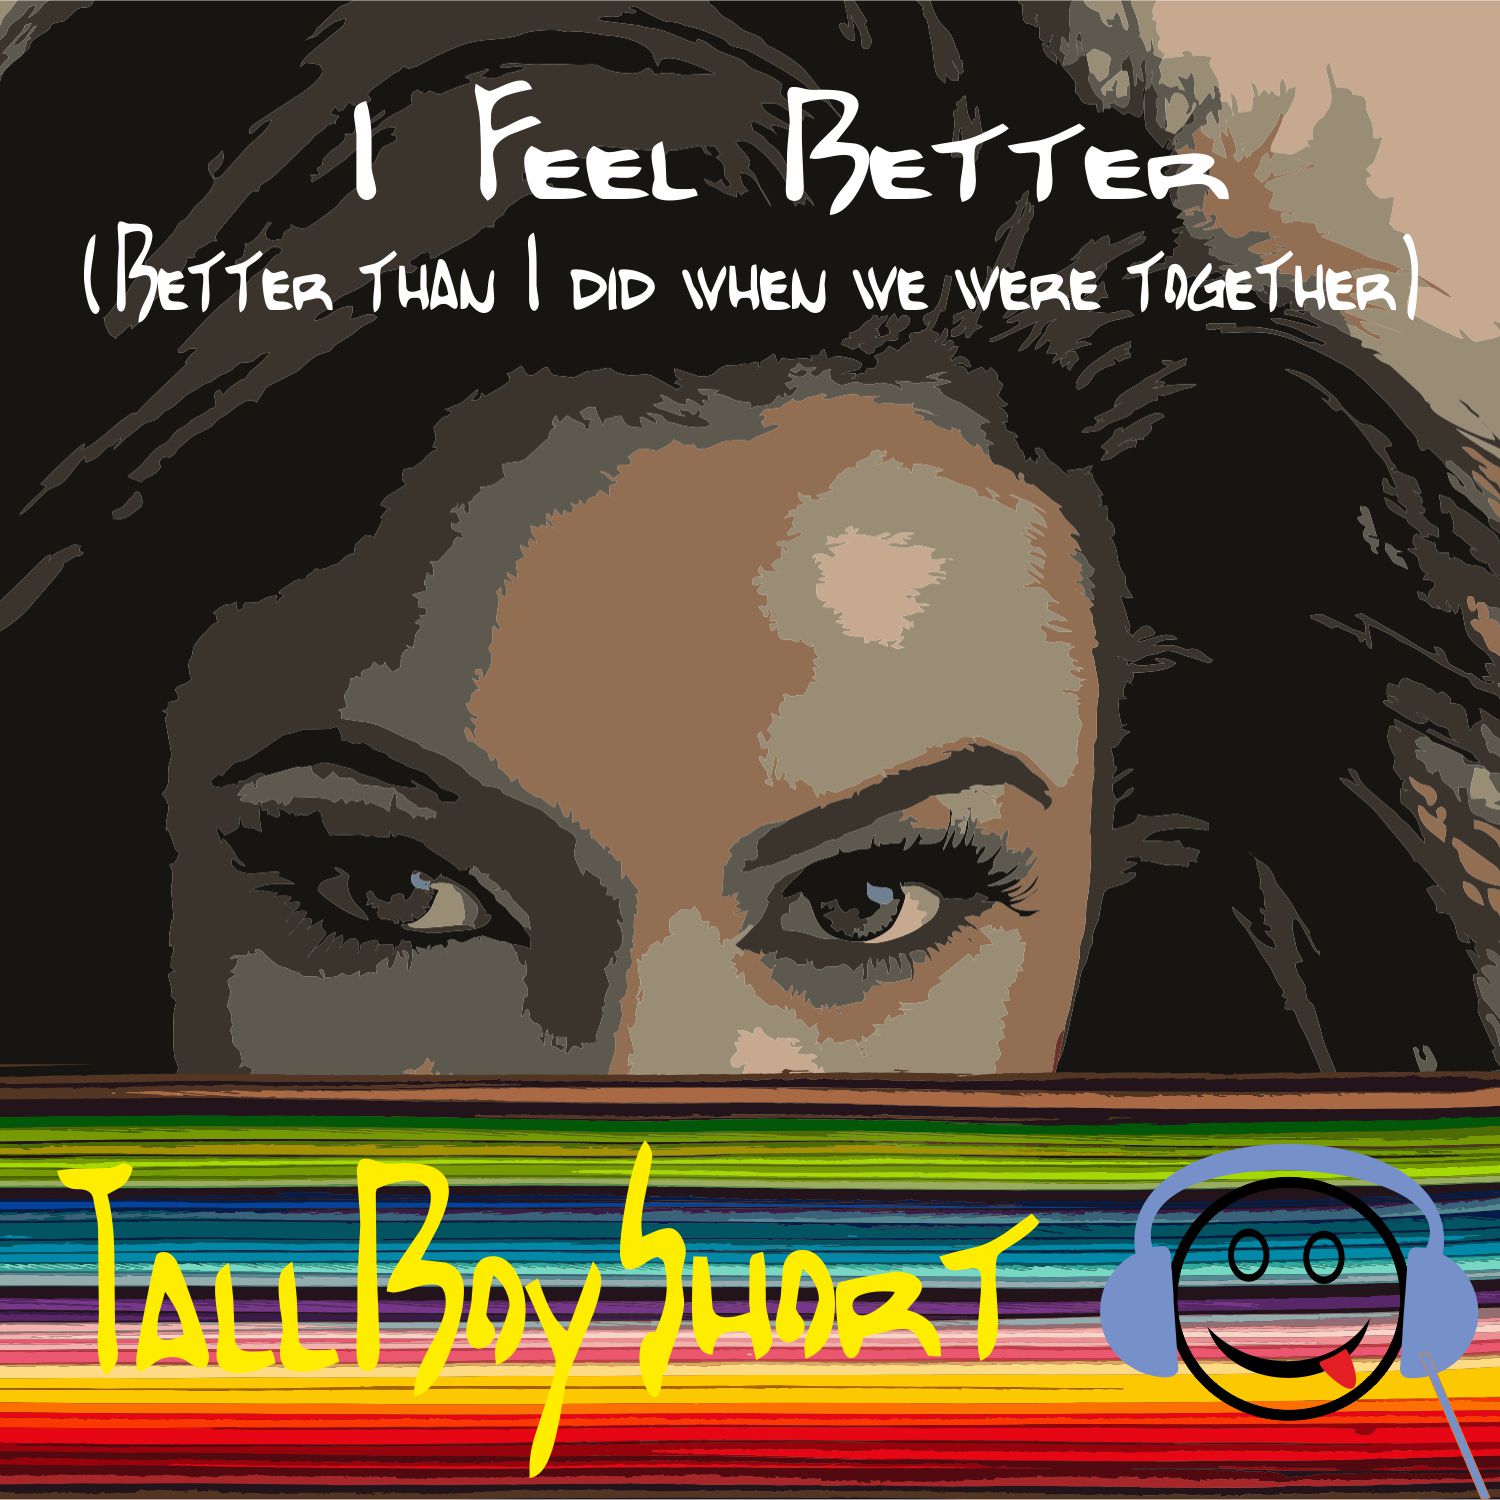 TallBoyShort TBS - I Feel Better (Better than I did when we were together)